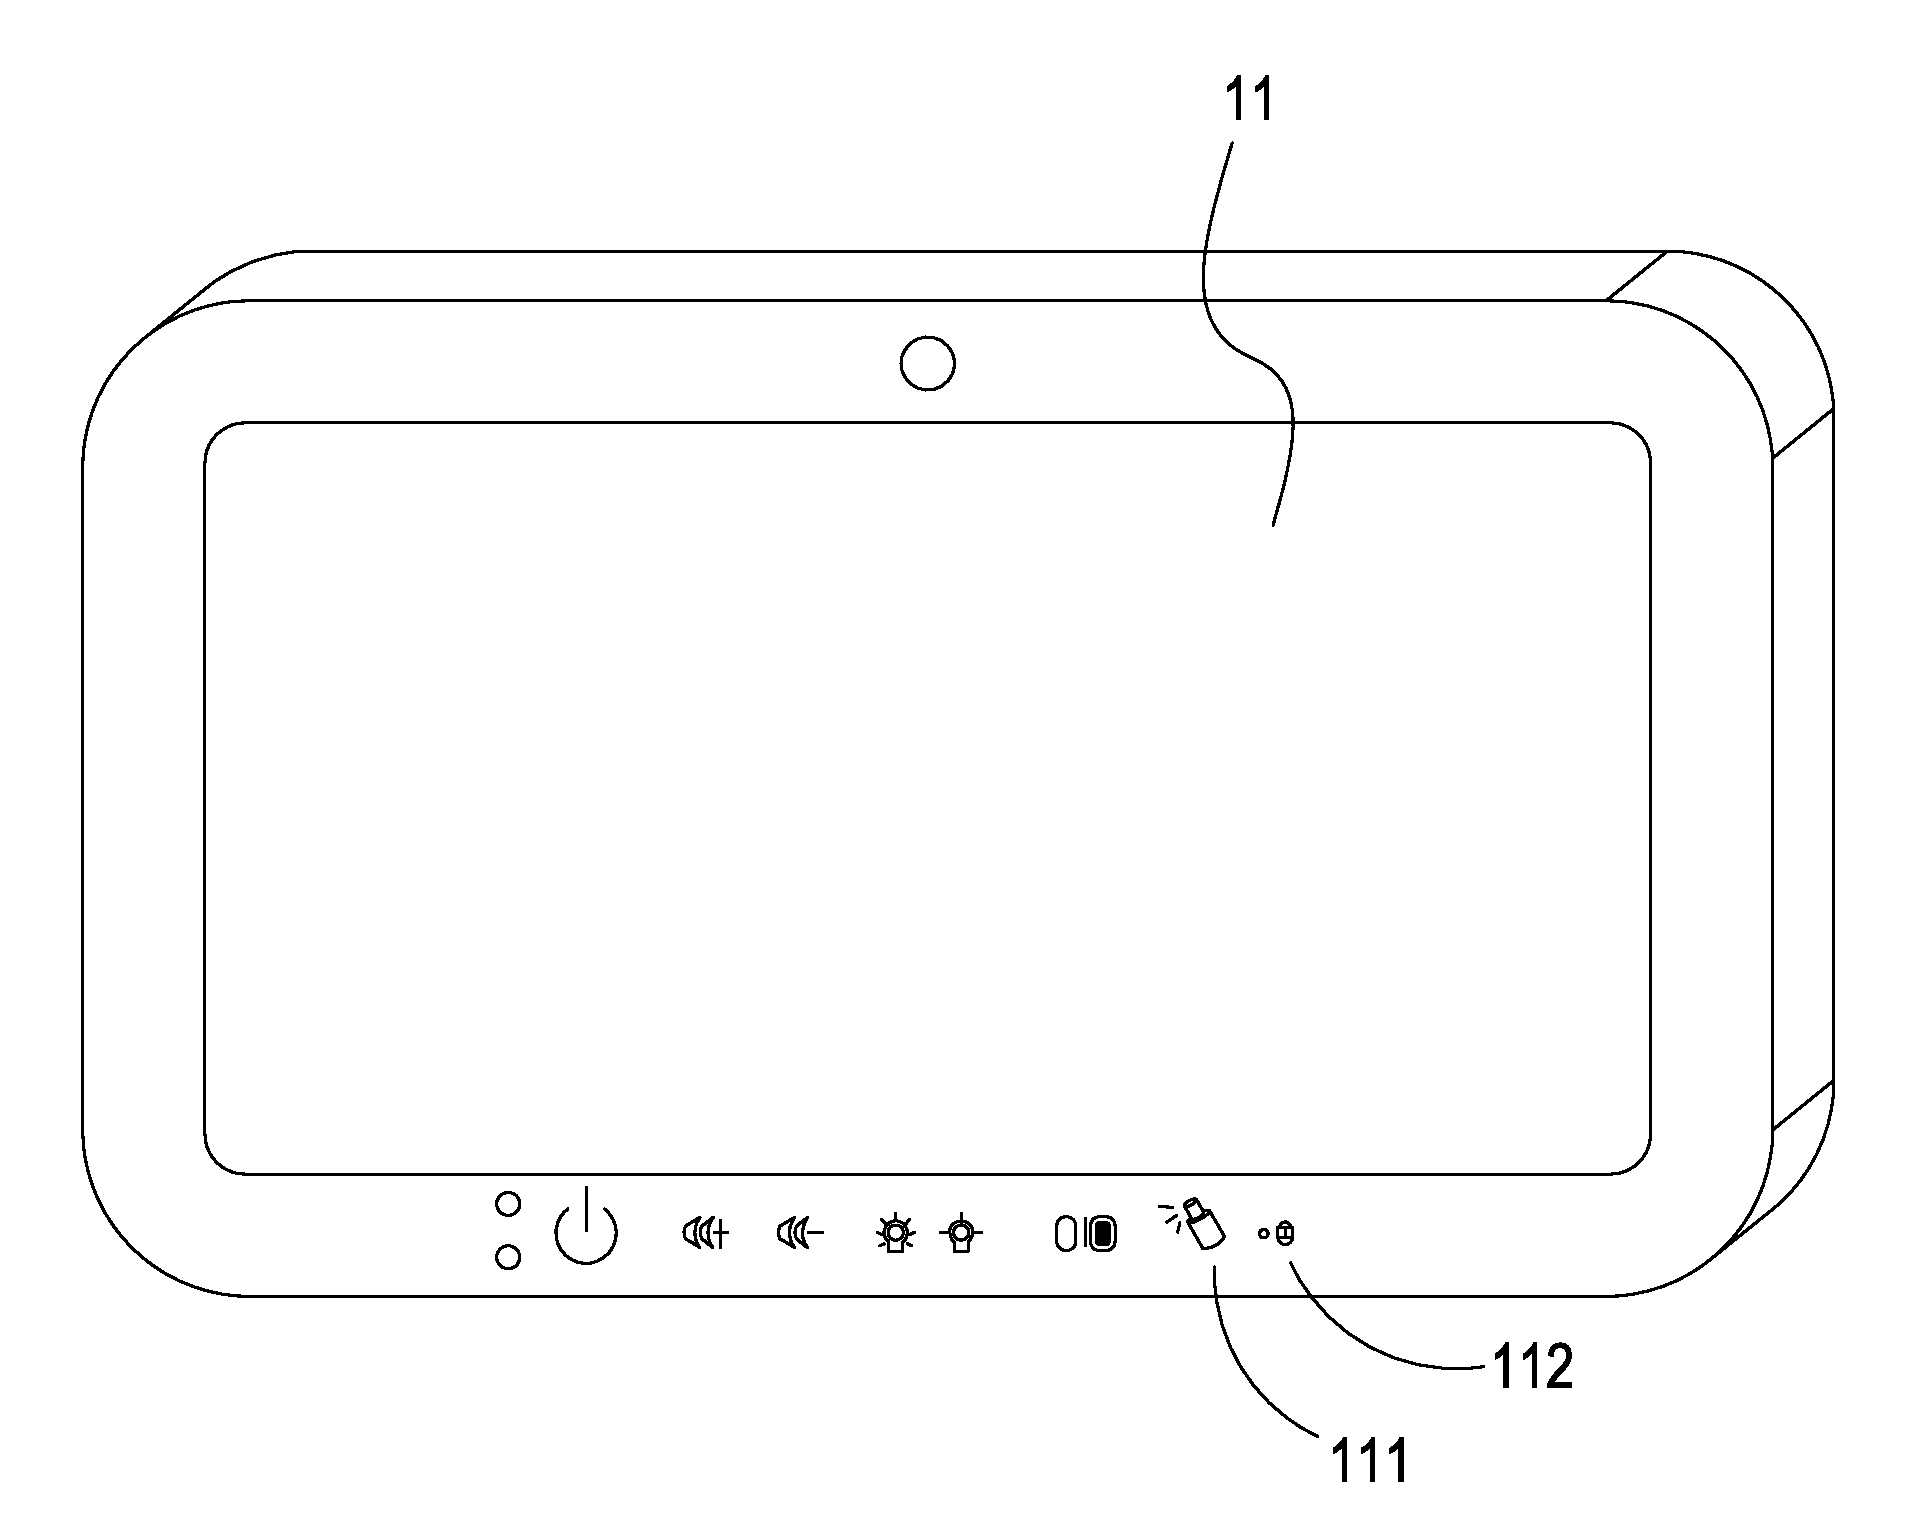 Button control system for medical touch screen and method thereof